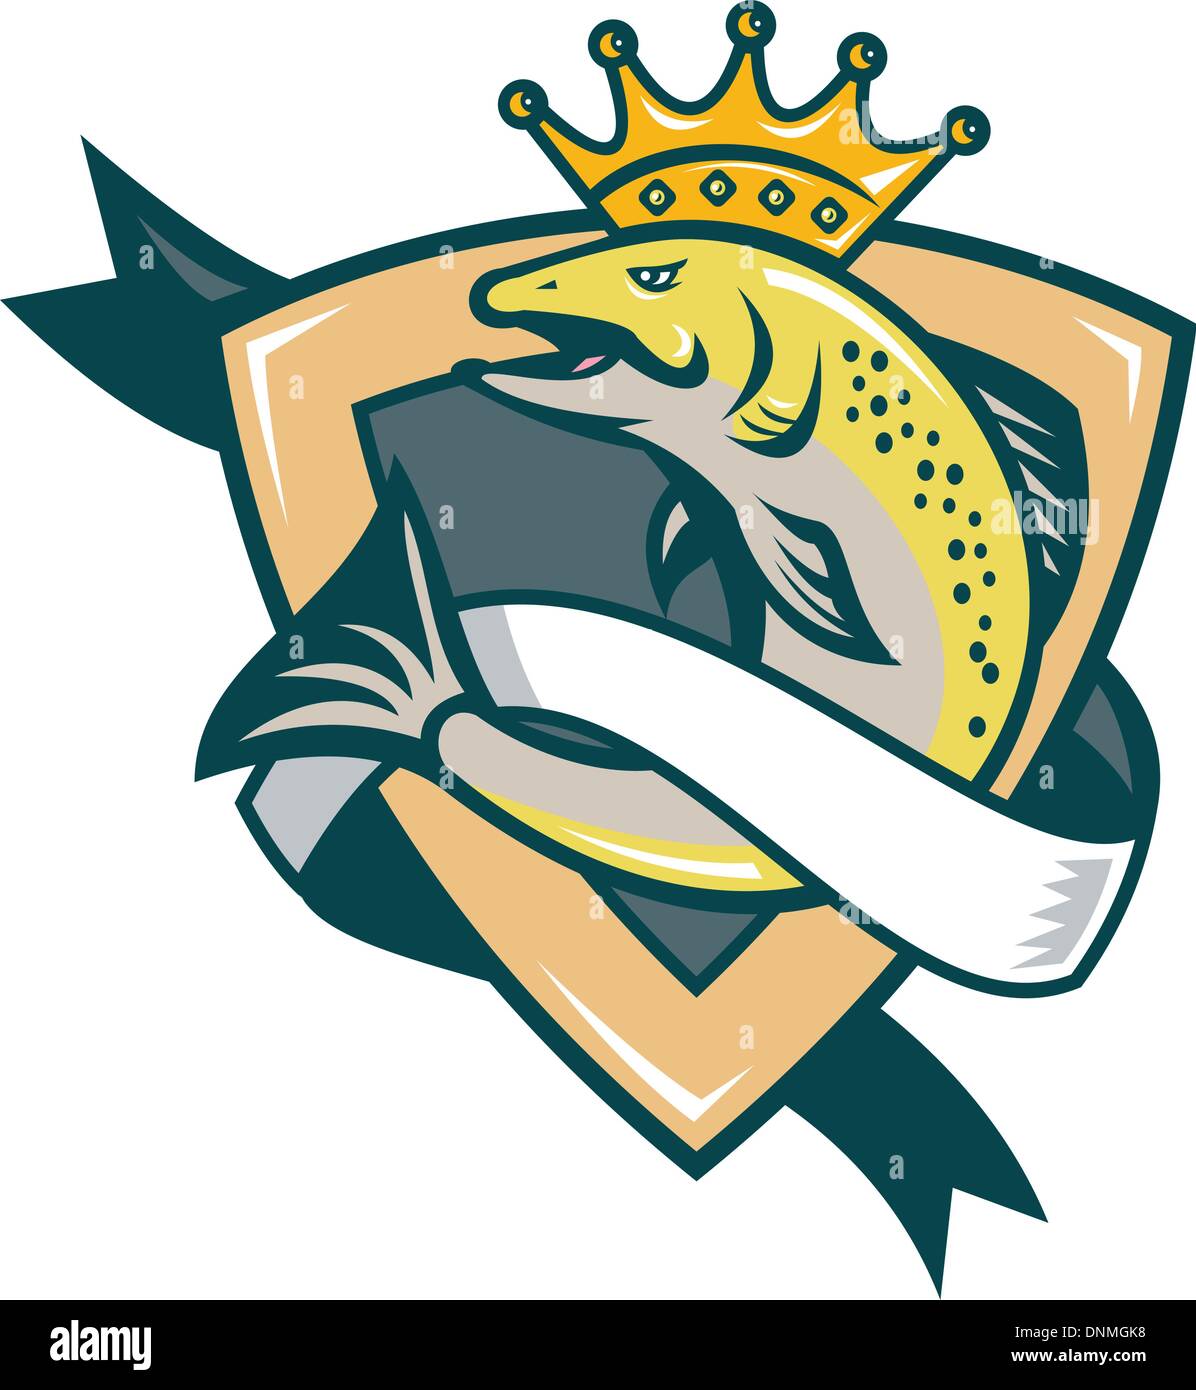 Illustration of a king salmon fish with crown jumping with shield and scroll in background done in retro style. Stock Vector